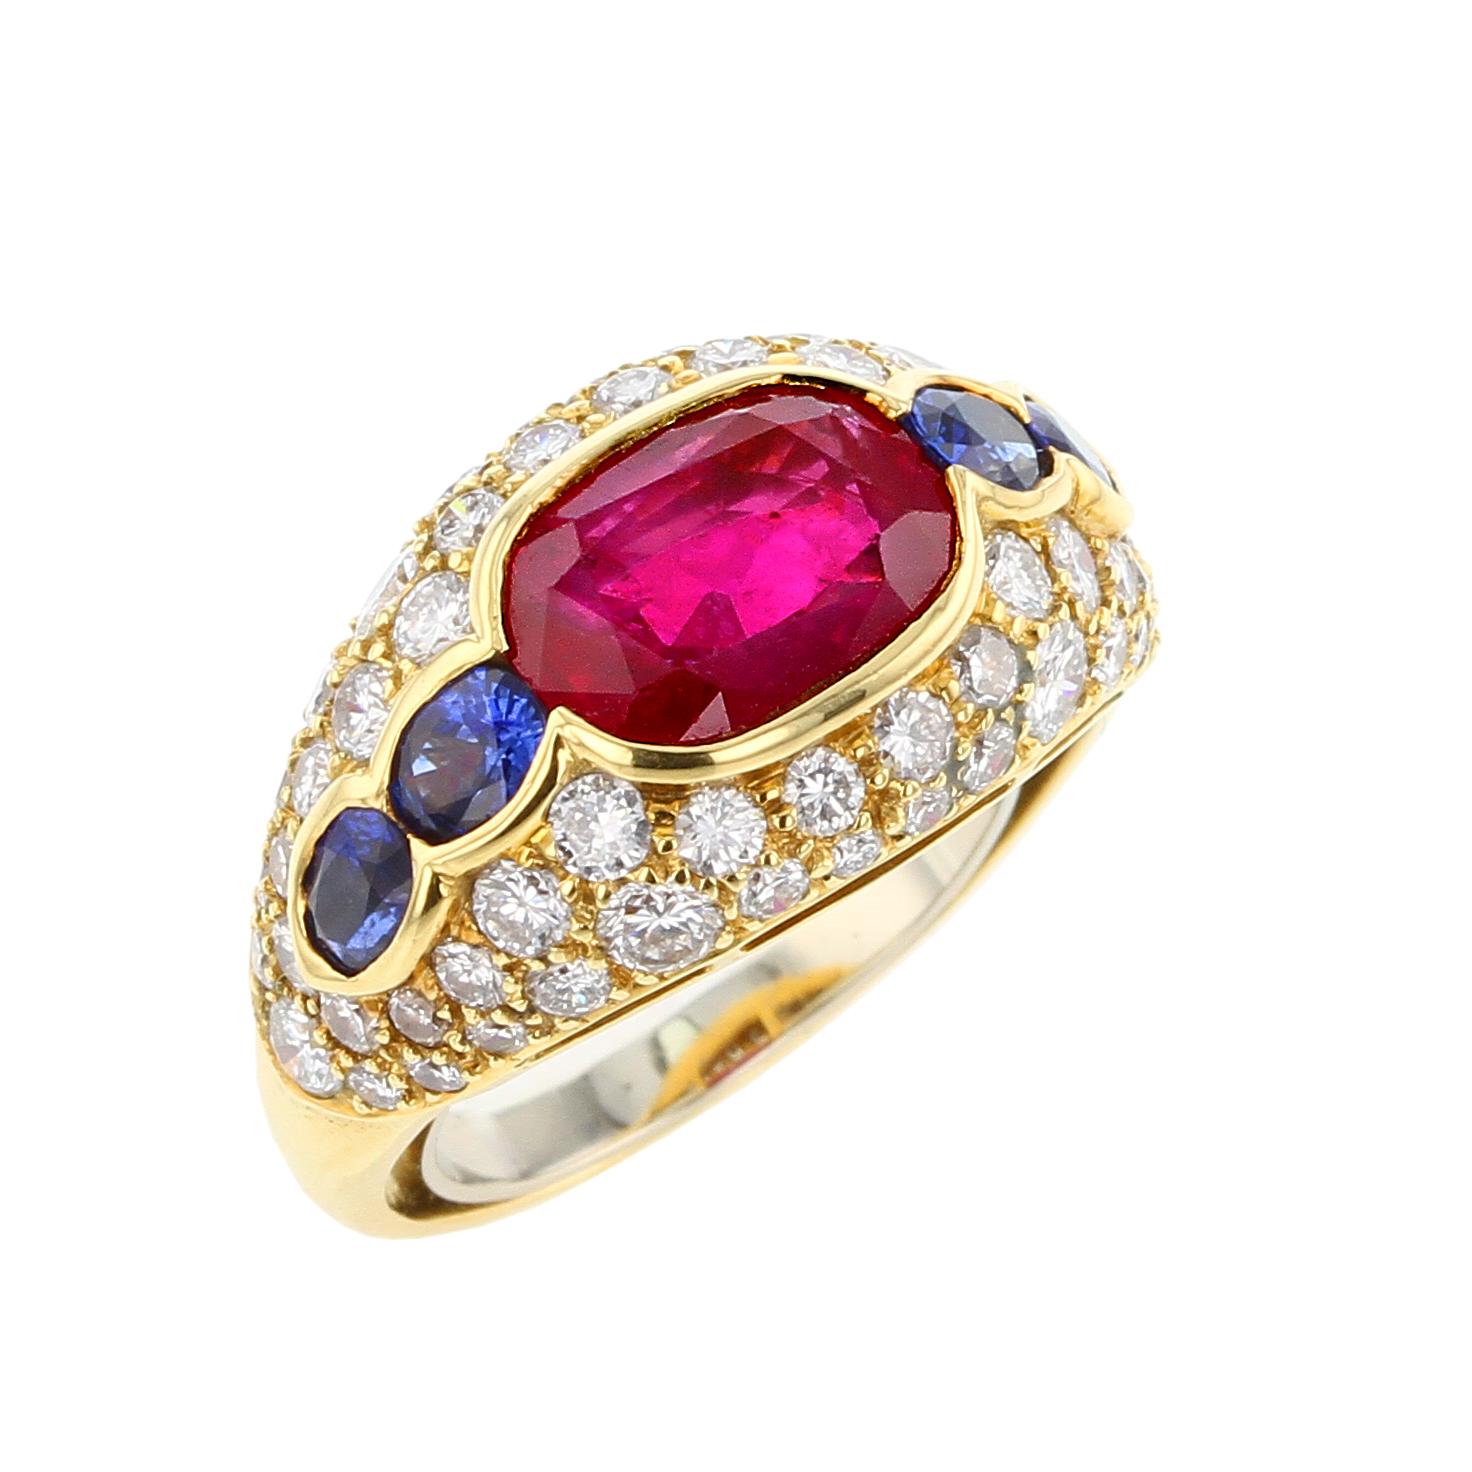 The Bvlgari ring features an oval-shaped burma ruby no heat measuring 9.85 x 7.00 x 4.28 mm and weighing 3.20 carats, flanked by oval-shaped sapphires approximately 0.75 carat, accented by brilliant-cut diamonds weighing a total of approximately